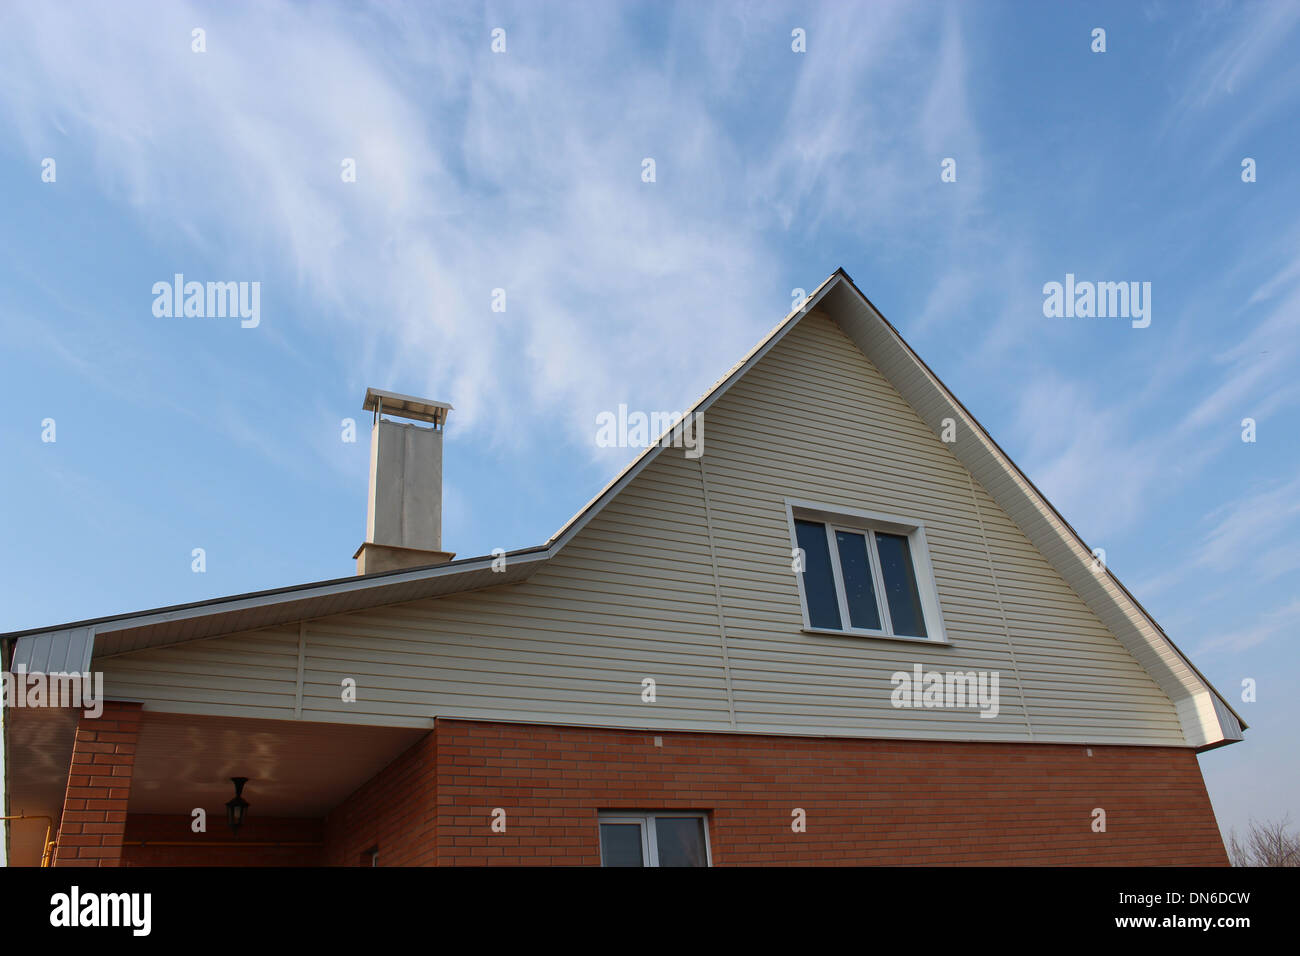 new private modern house on the blue sky background Stock Photo